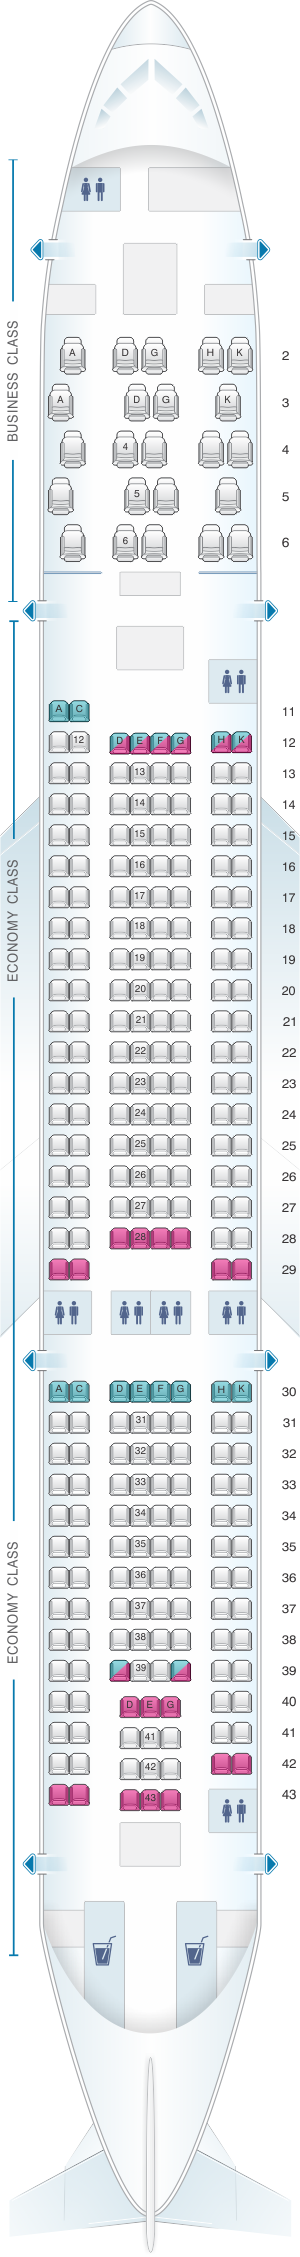 Seat map for Aer Lingus Airbus A330 200 Config. 1